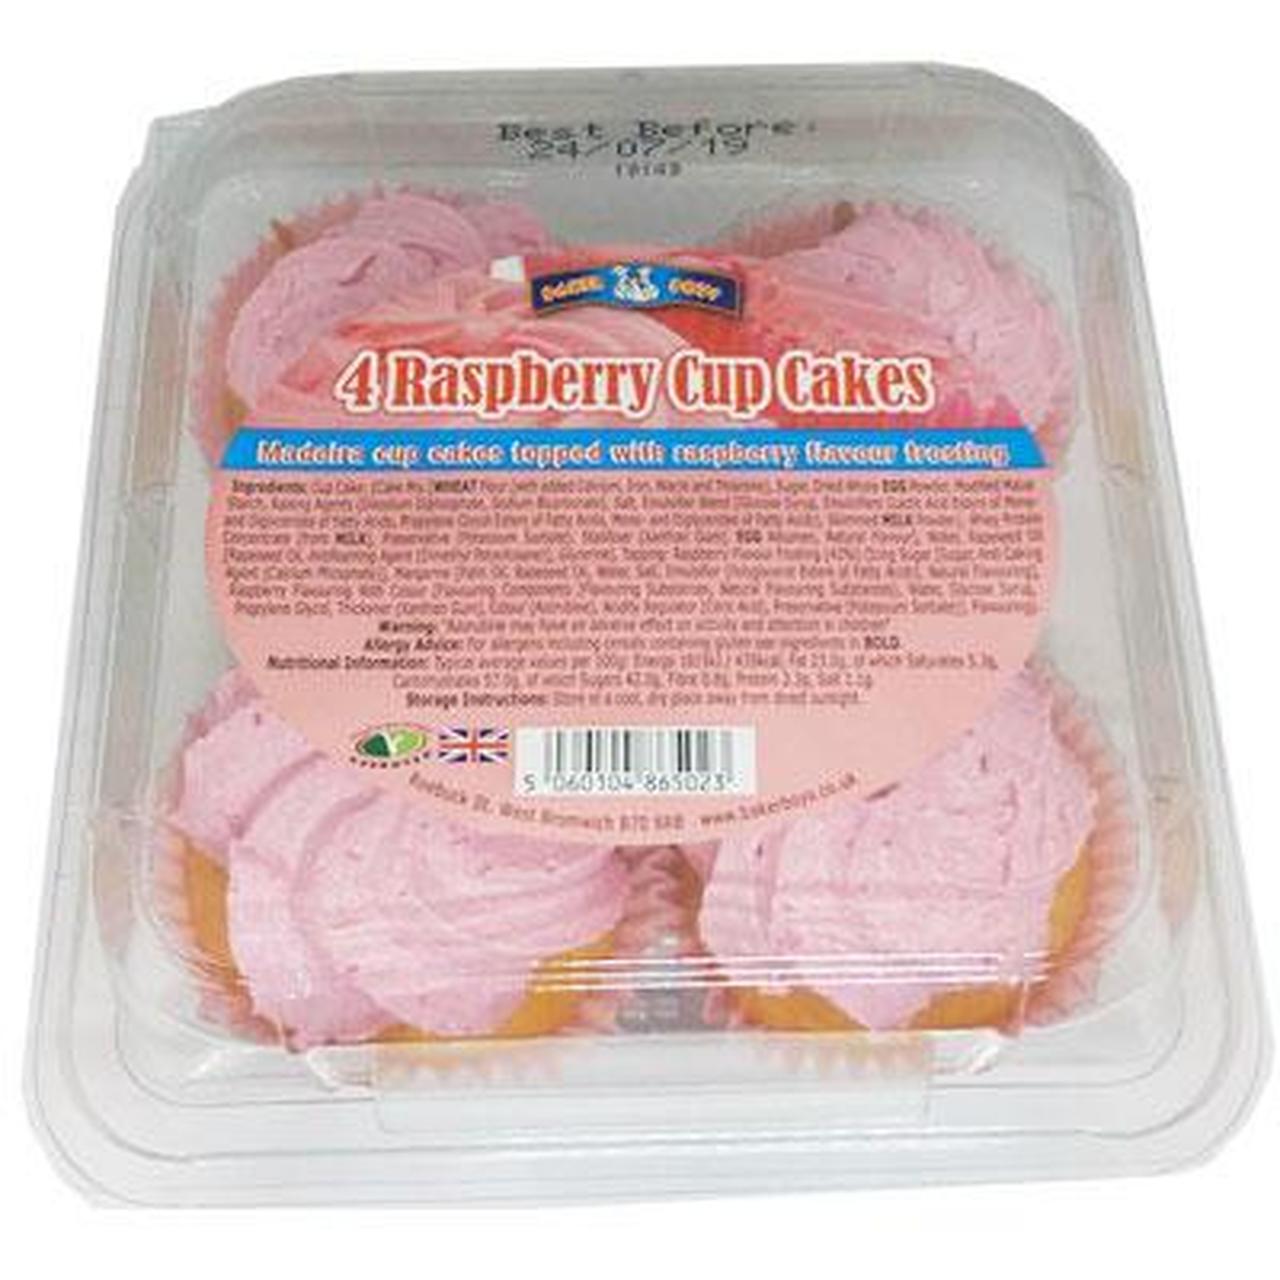 Baker Boys 4 Raspberry Cup Cakes (Jan - Aug 23) RRP £1.49 CLEARANCE XL 89p or 2 for £1.50